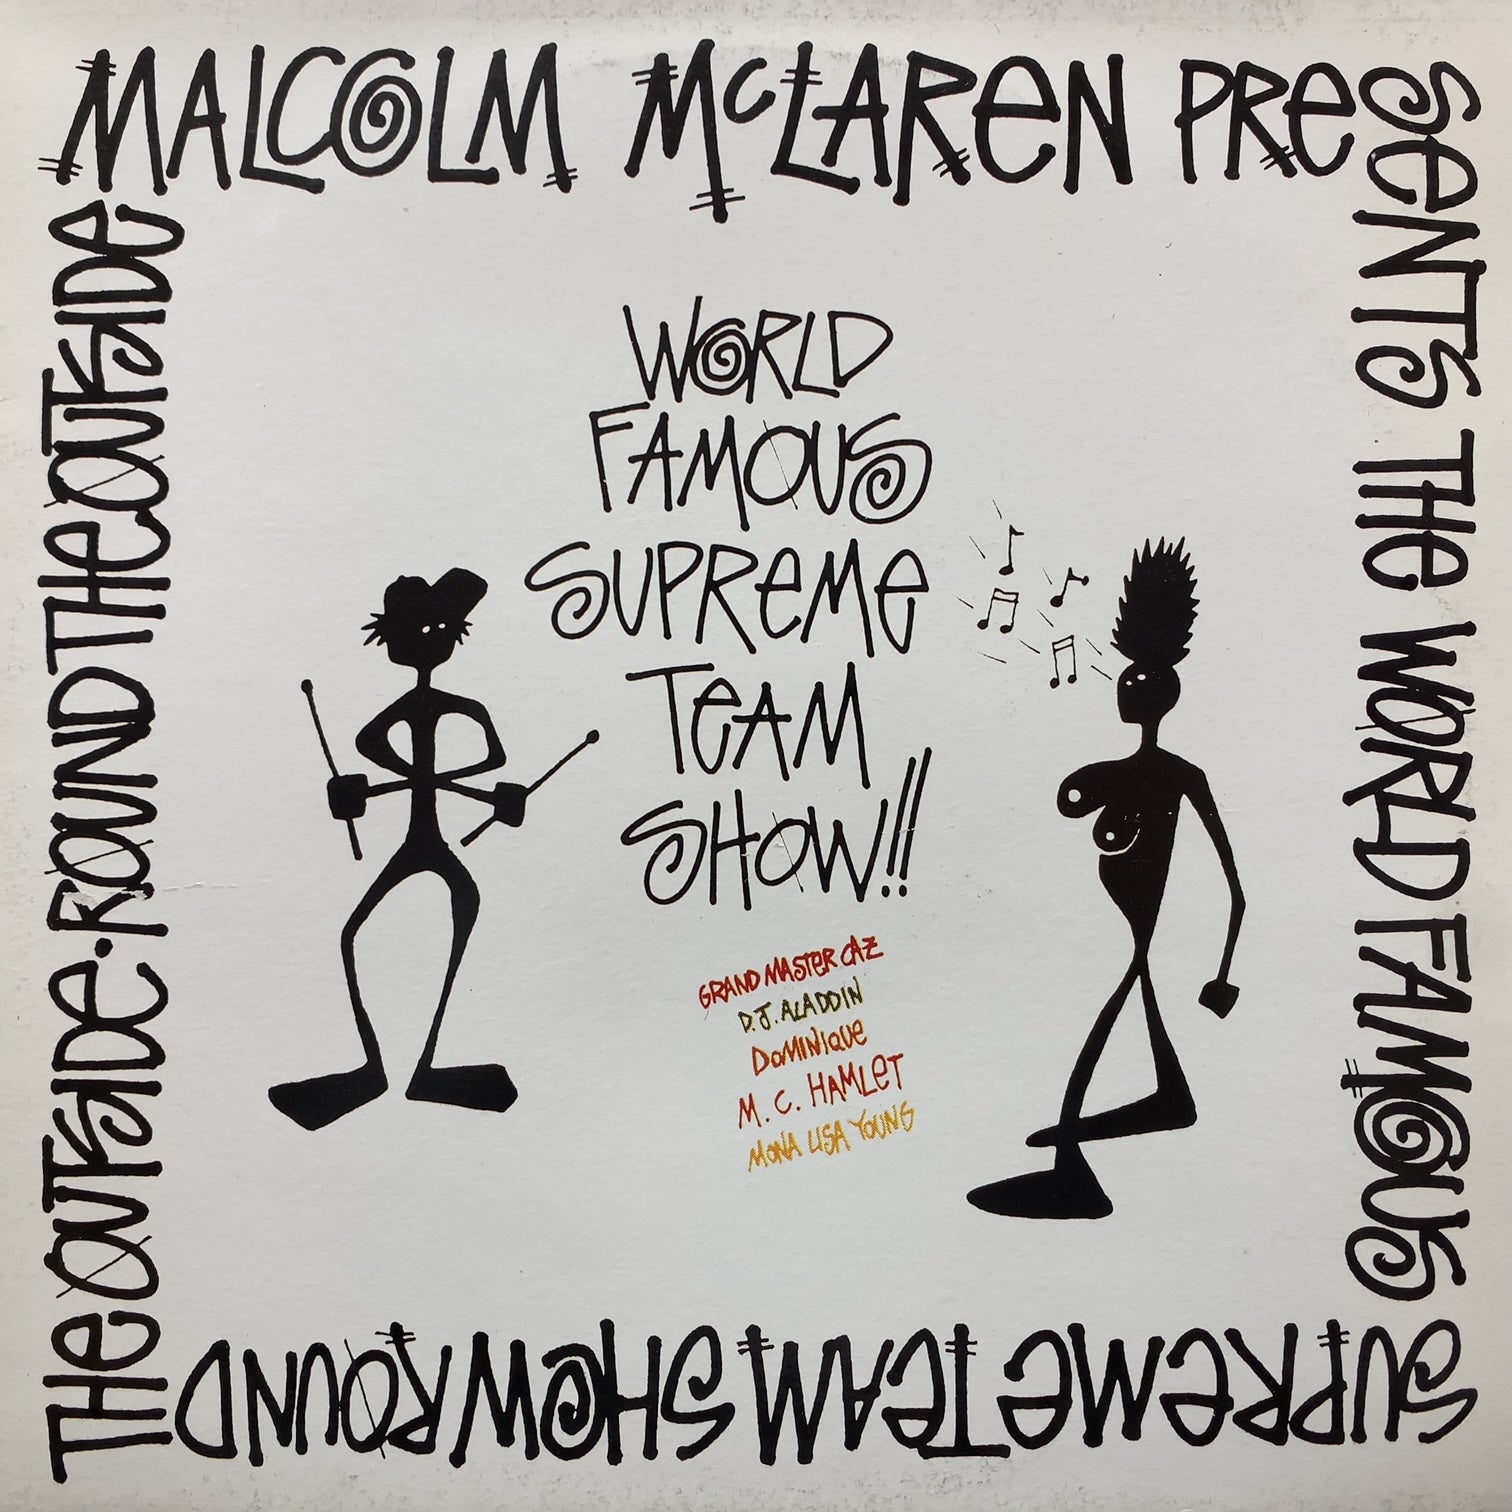 MALCOLM McLAREN & WORLD'S FAMOUS SUPREME TEAM / ROUND THE OUTSIDE! ROUND  THE OUTSIDE!